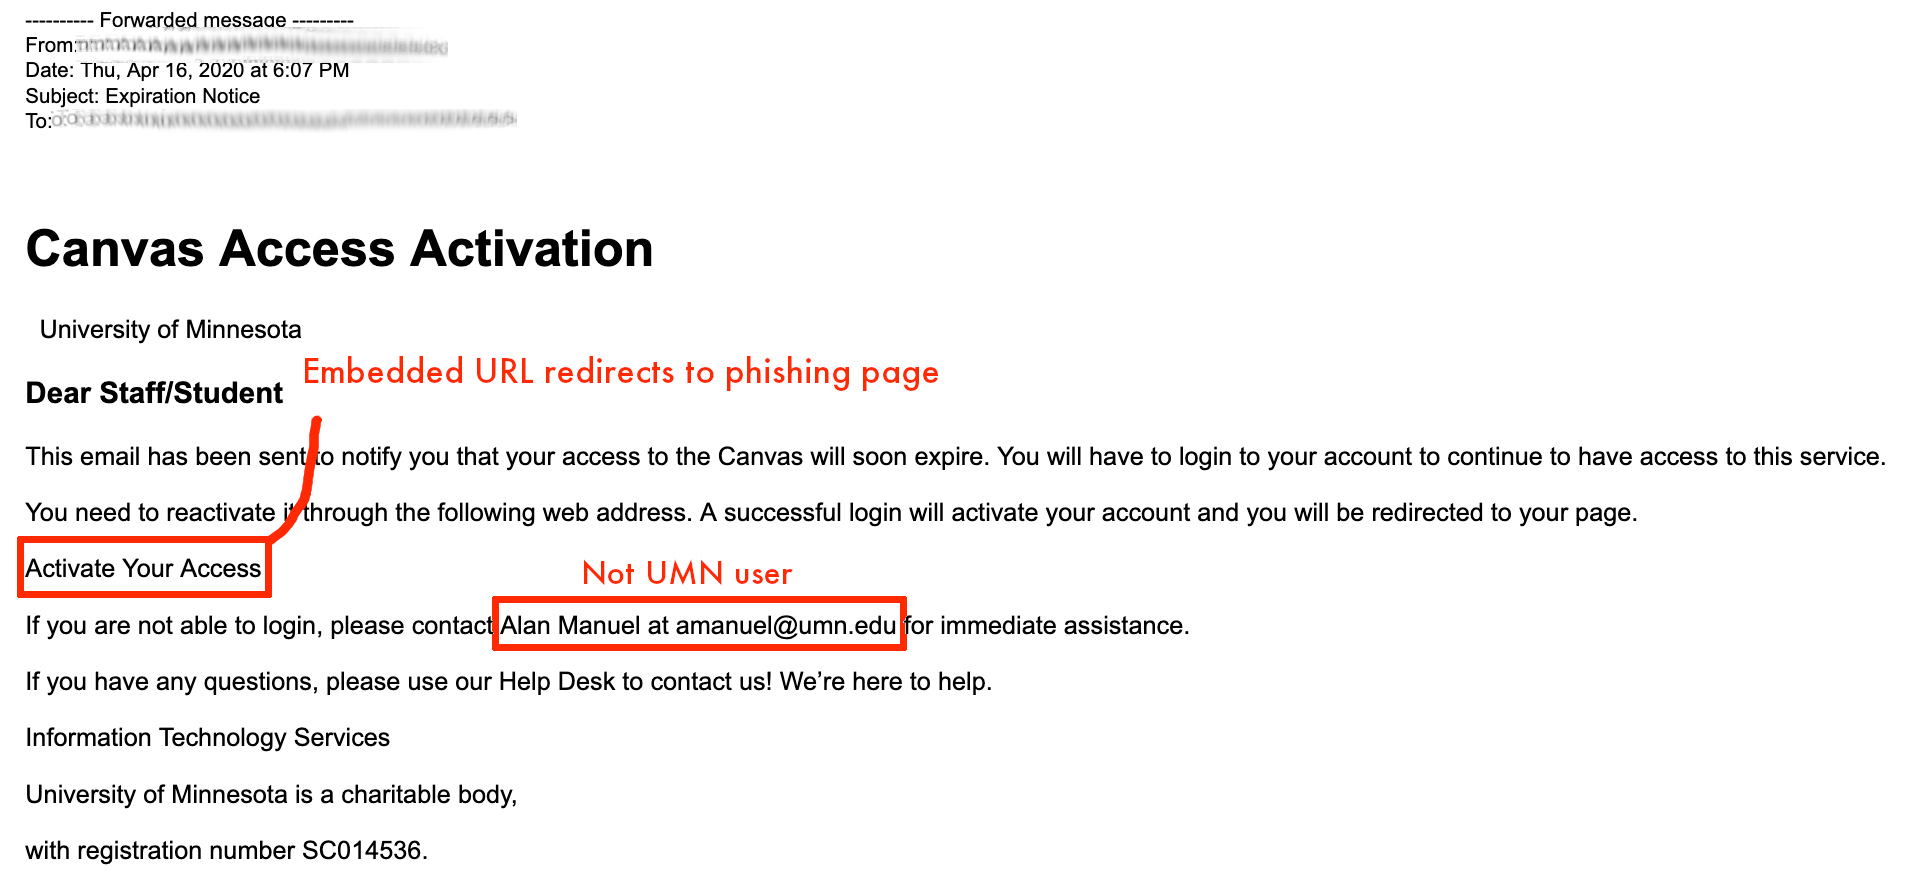 A screenshot of the phishing email message for Canvas